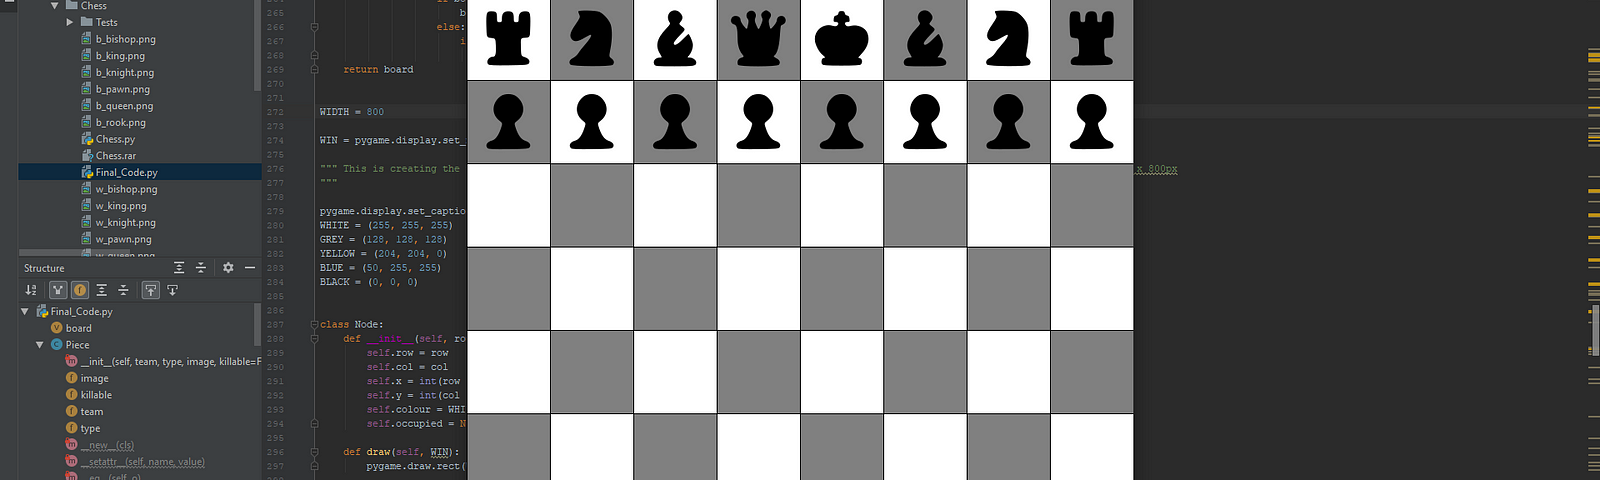 Making Chess in Python. This is a large project that me and a…, by  PasiduPerera